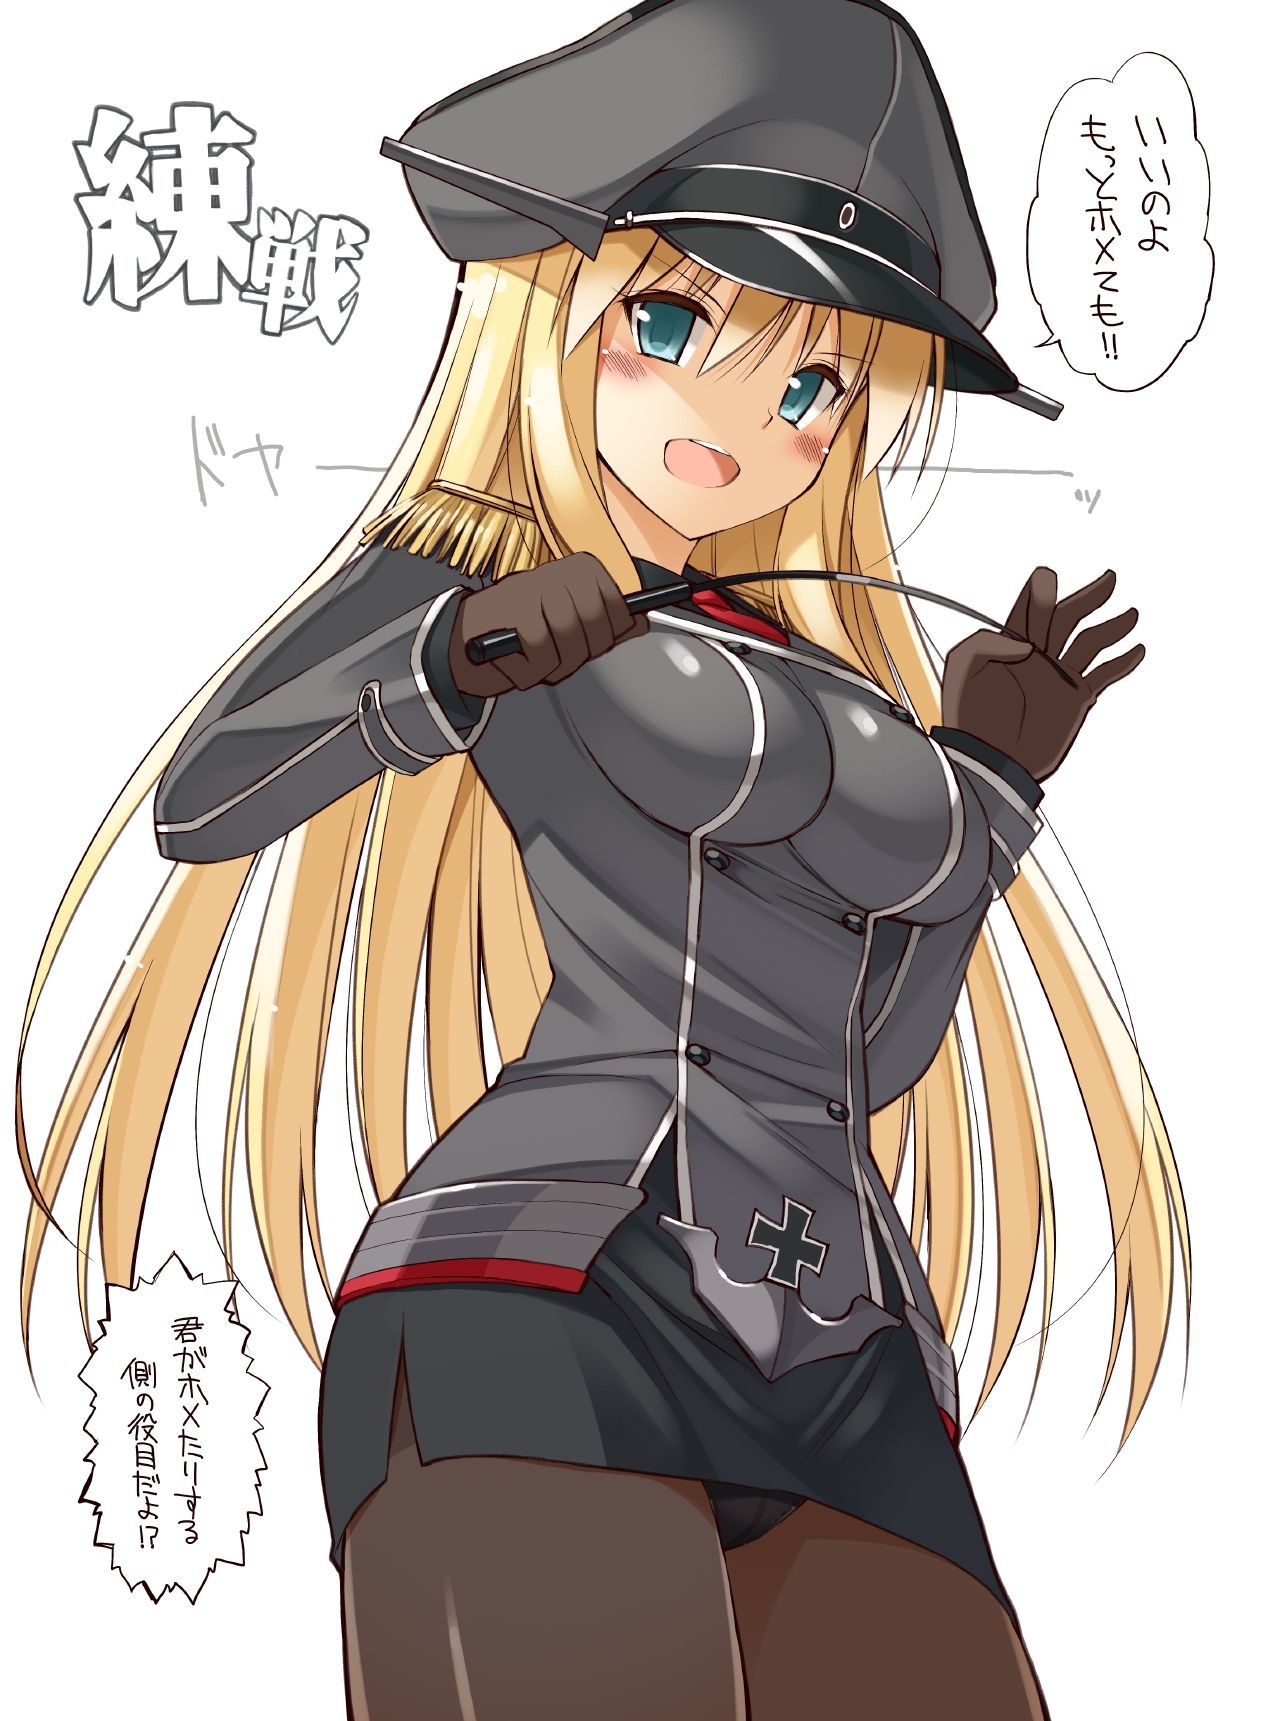 [Image] "ship this ' of warship daughter sexy cuteness is abnormal wwwwwwwwwwww 69